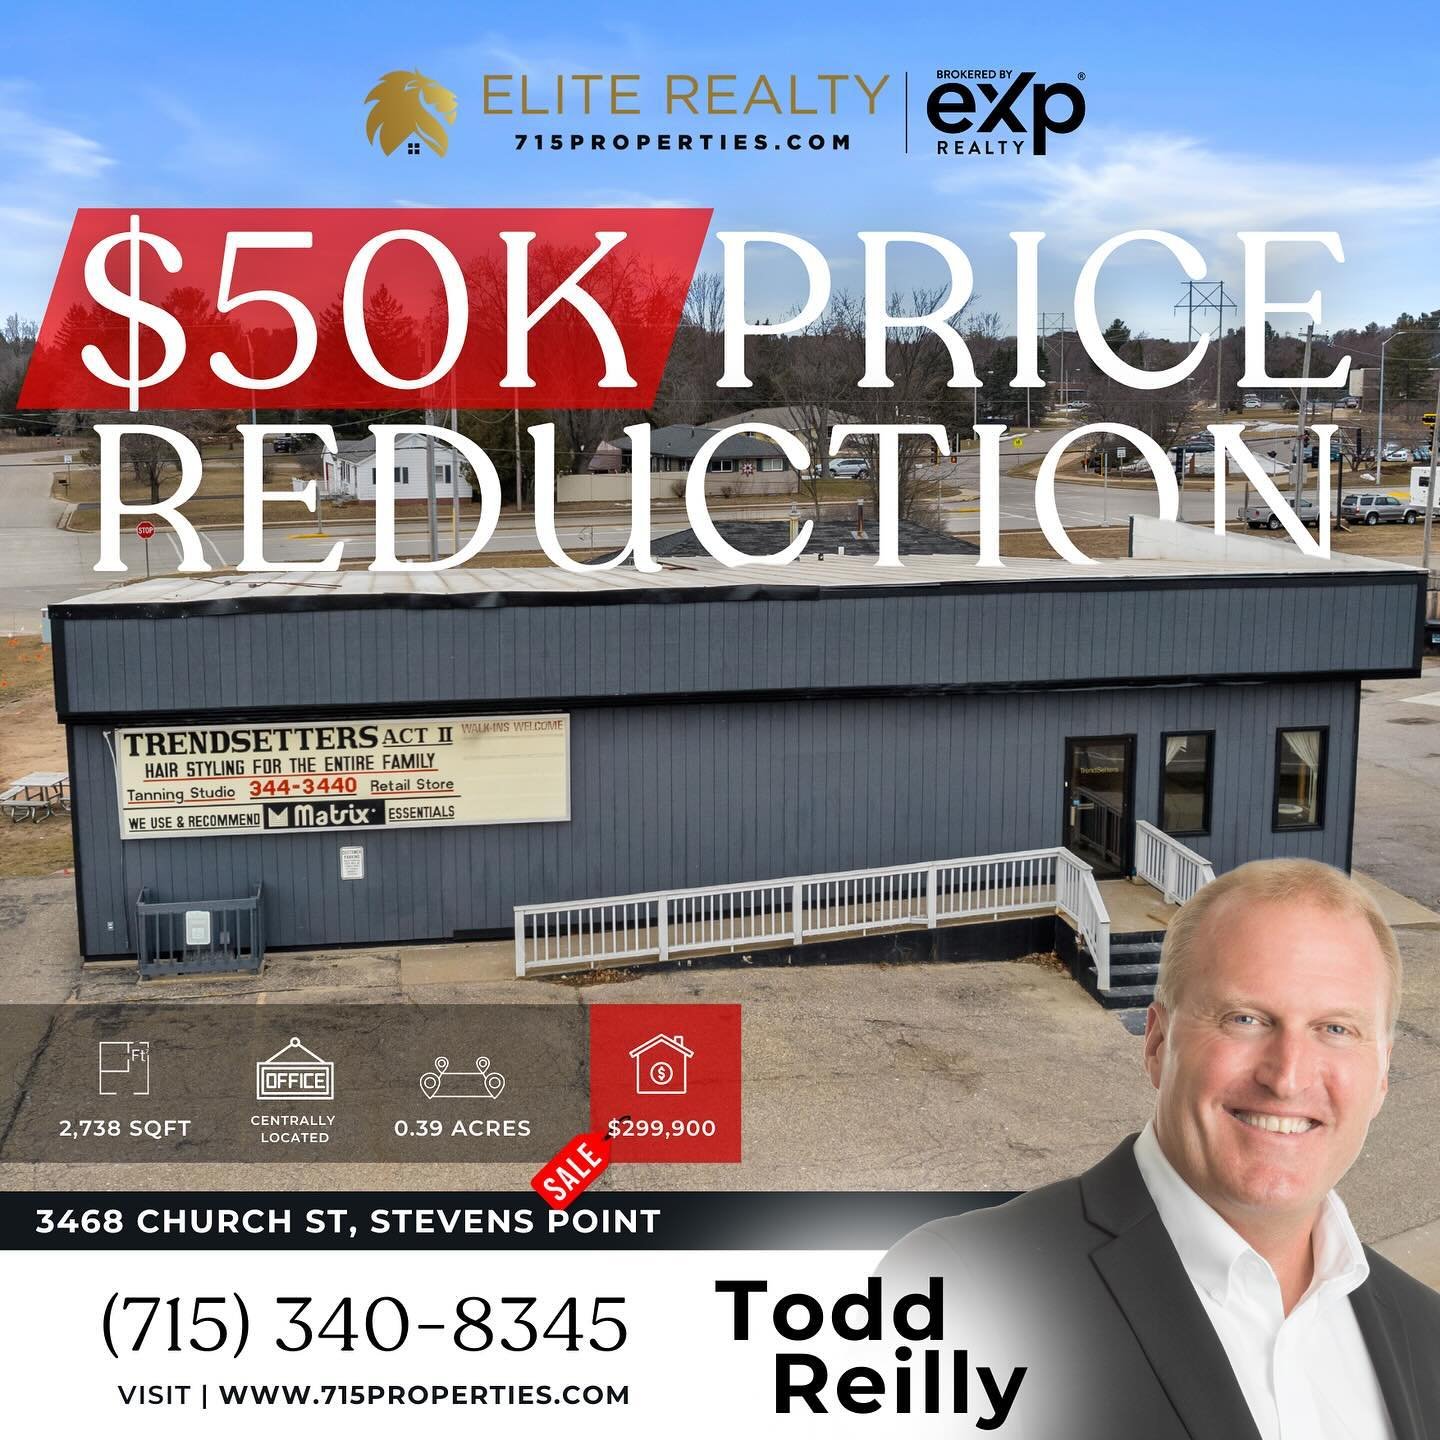 🚨 $50K Price Reduction 🚨 Commercial building suitable for office, retail or service businesses. ADA compliant. PRIME, HIGH visibility location with ample parking, garage storage plus room for expansion if a larger building, storage or more parking 